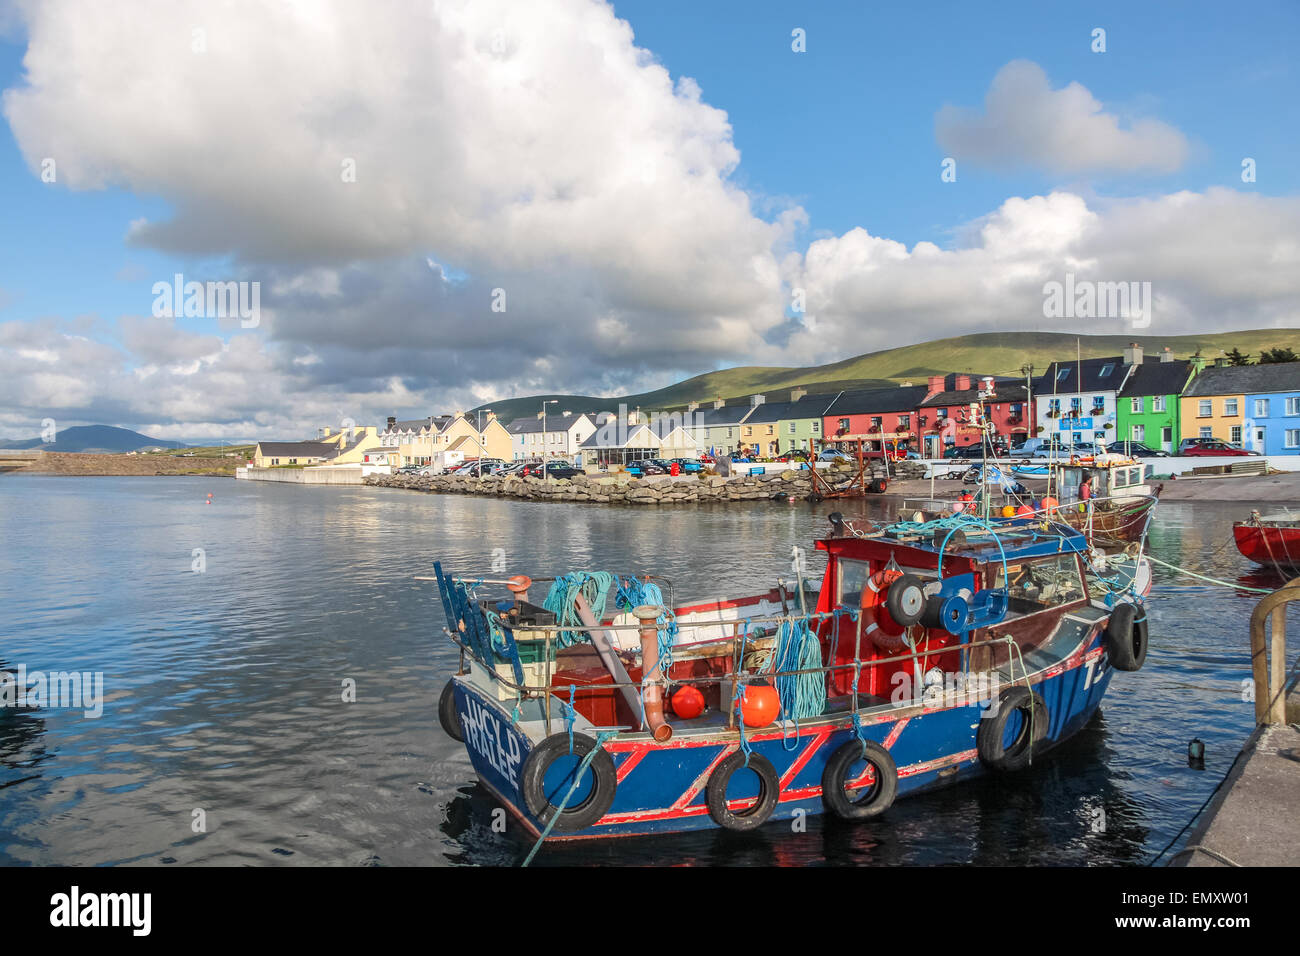 Fishing boat in the port of Portmagee, County Kerry, Ireland Stock Photo